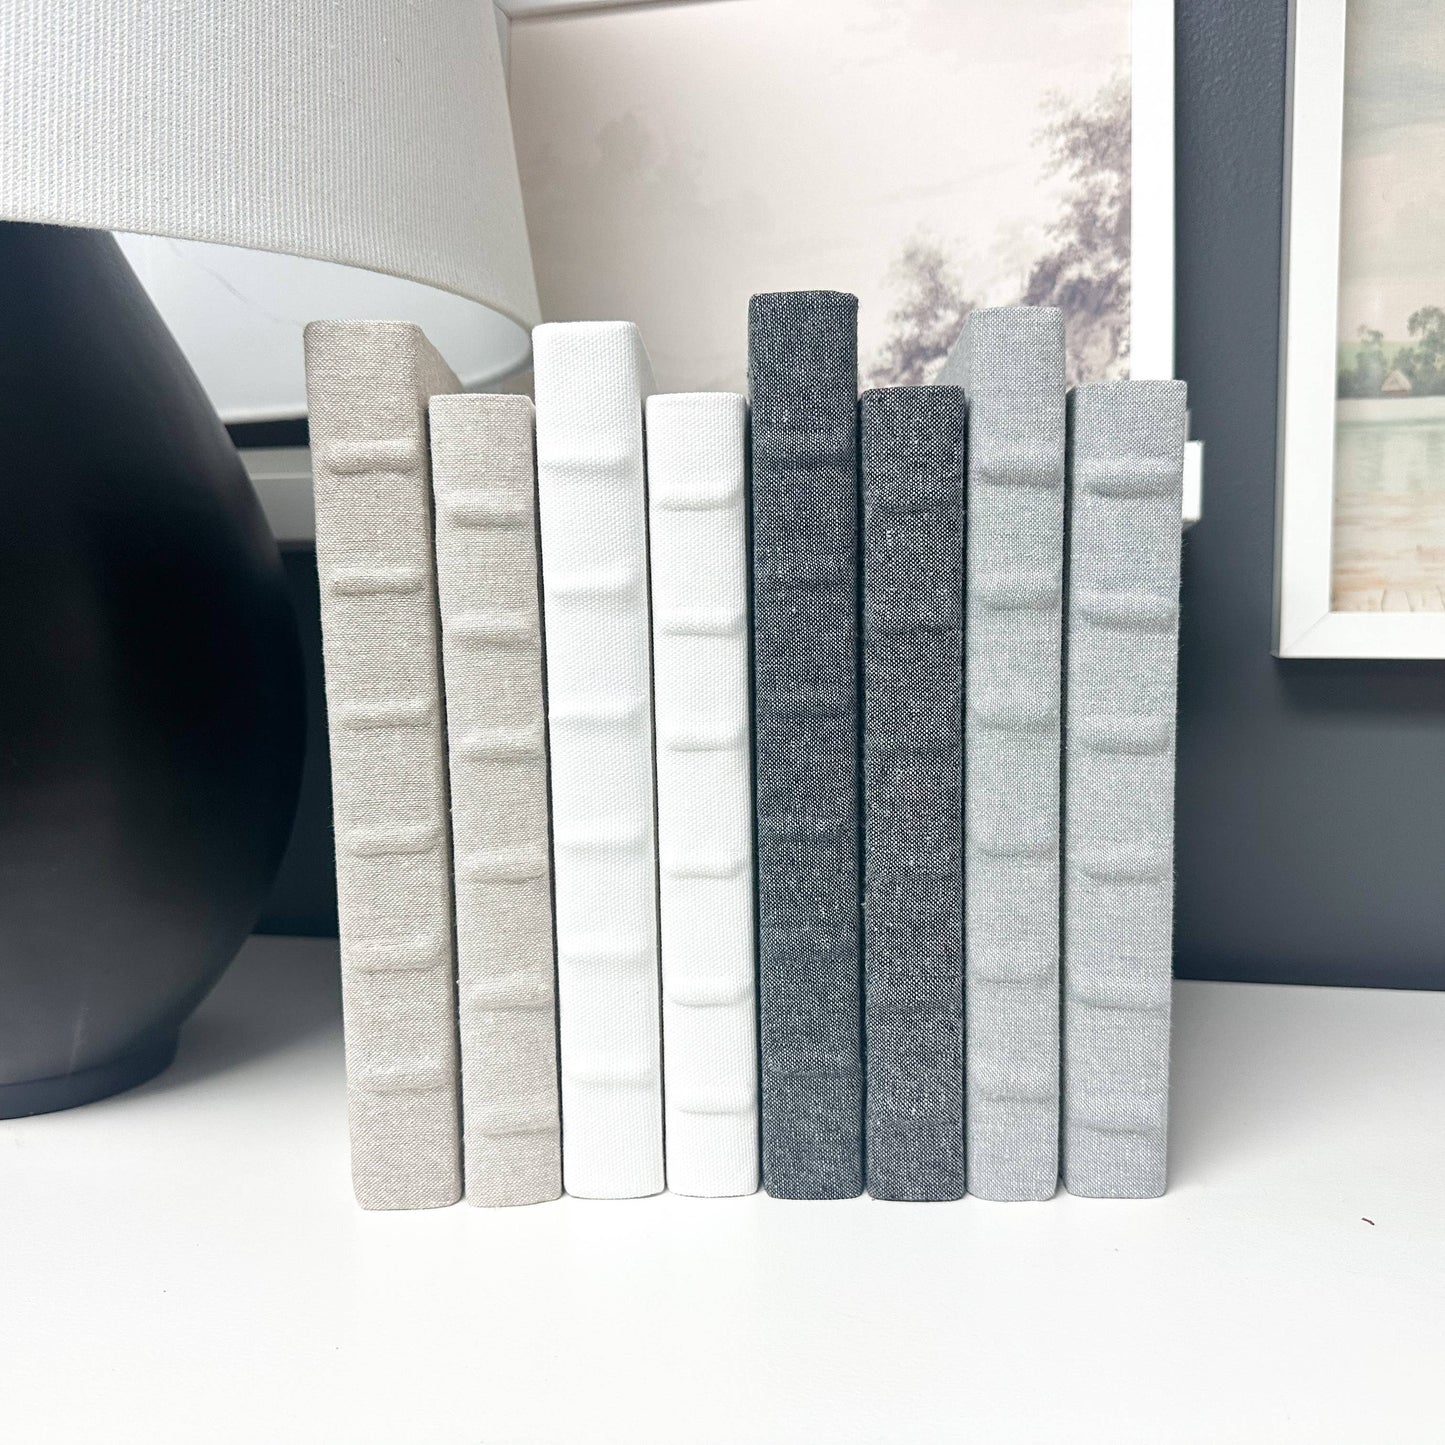 Decorative Book for Shelf Decor -Charcoal Linen Covered